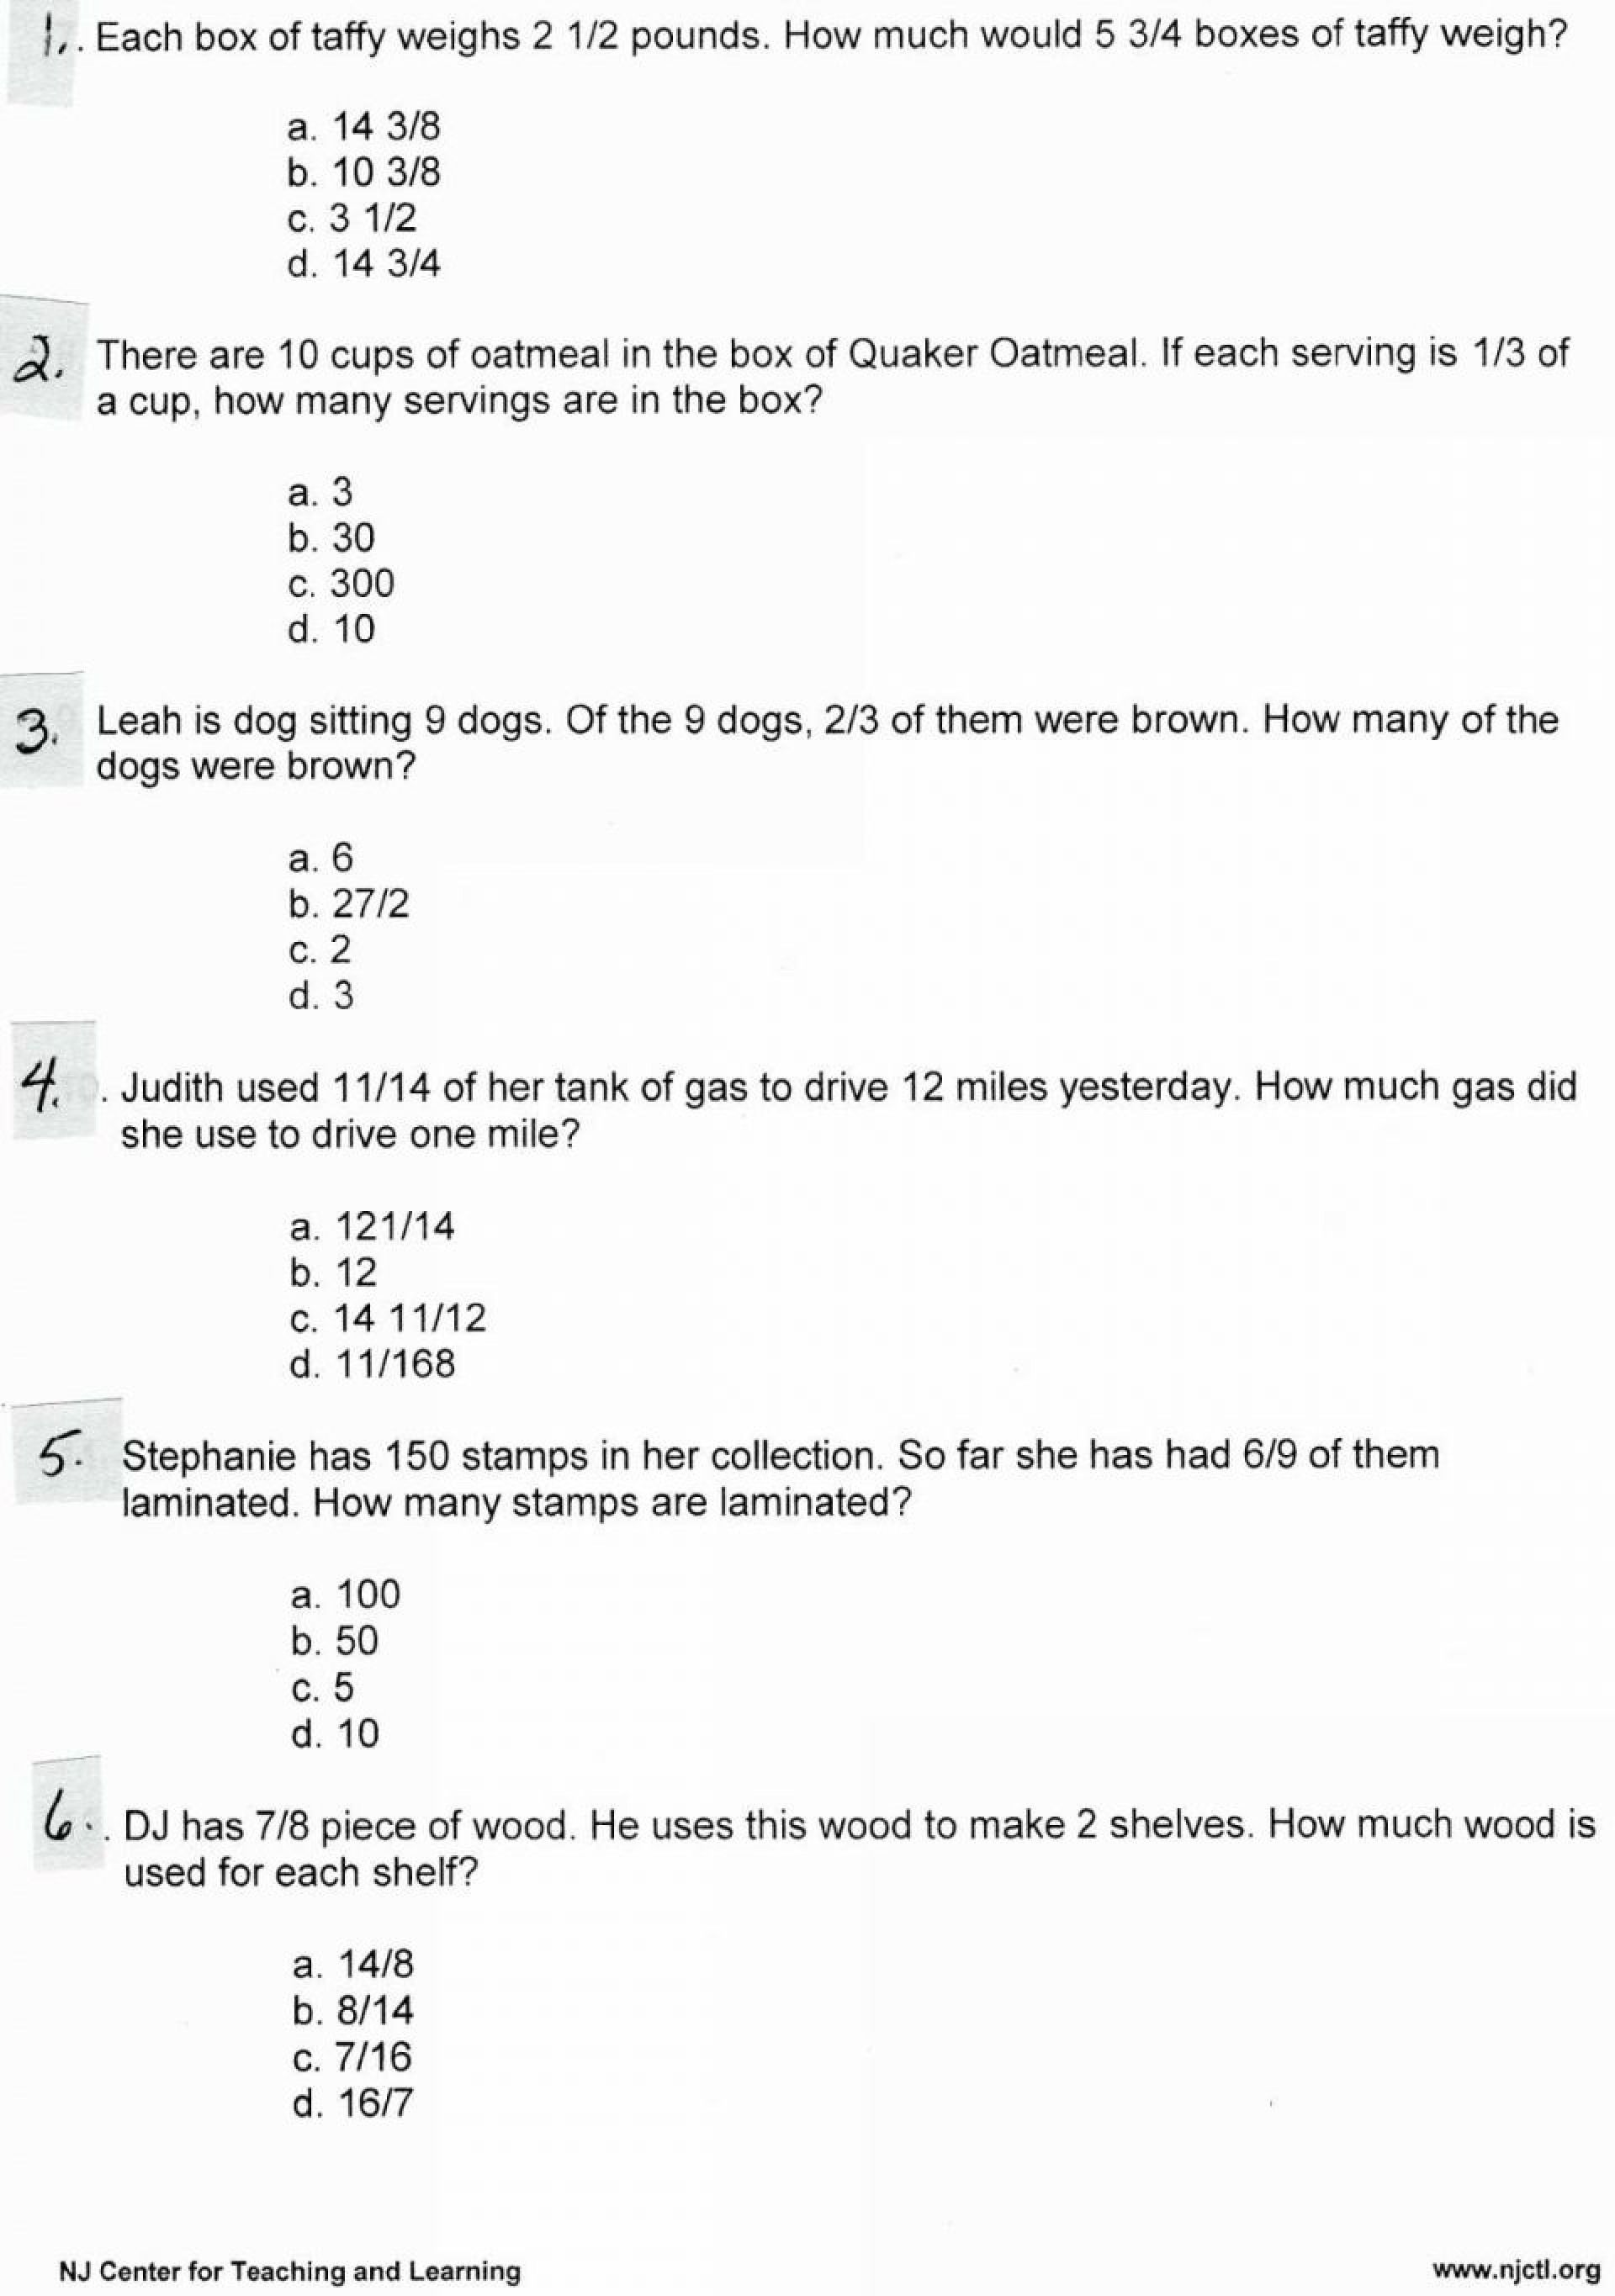 dividing-fractions-word-problems-6th-grade-worksheets-db-excelcom-math-division-grade-3-grade